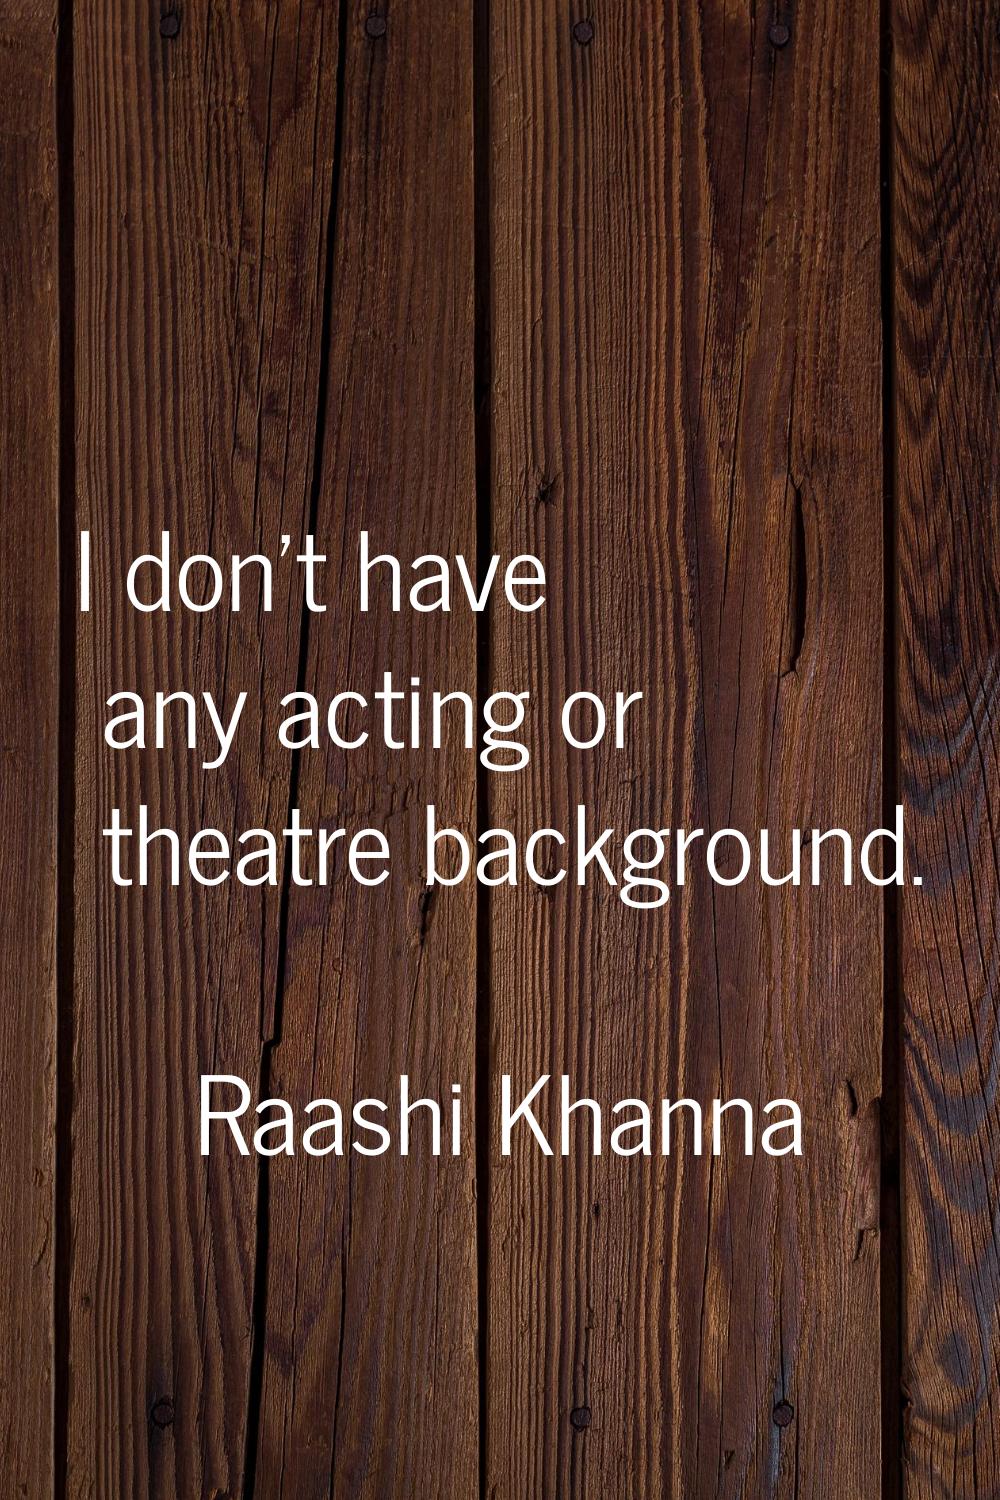 I don't have any acting or theatre background.